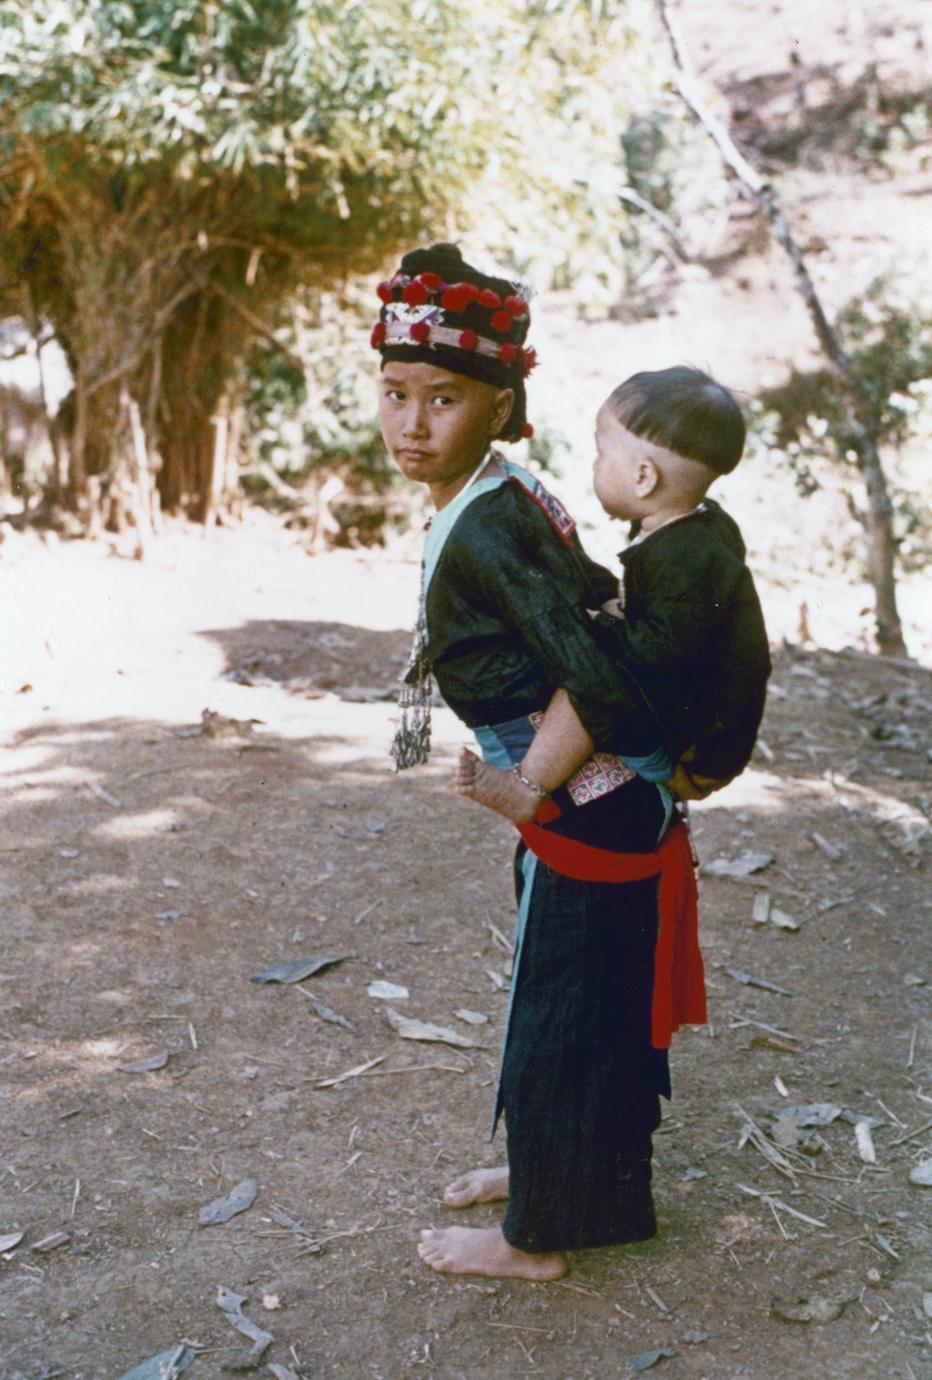 Hmong girl carrying her little brother on her back in Houa Khong Province